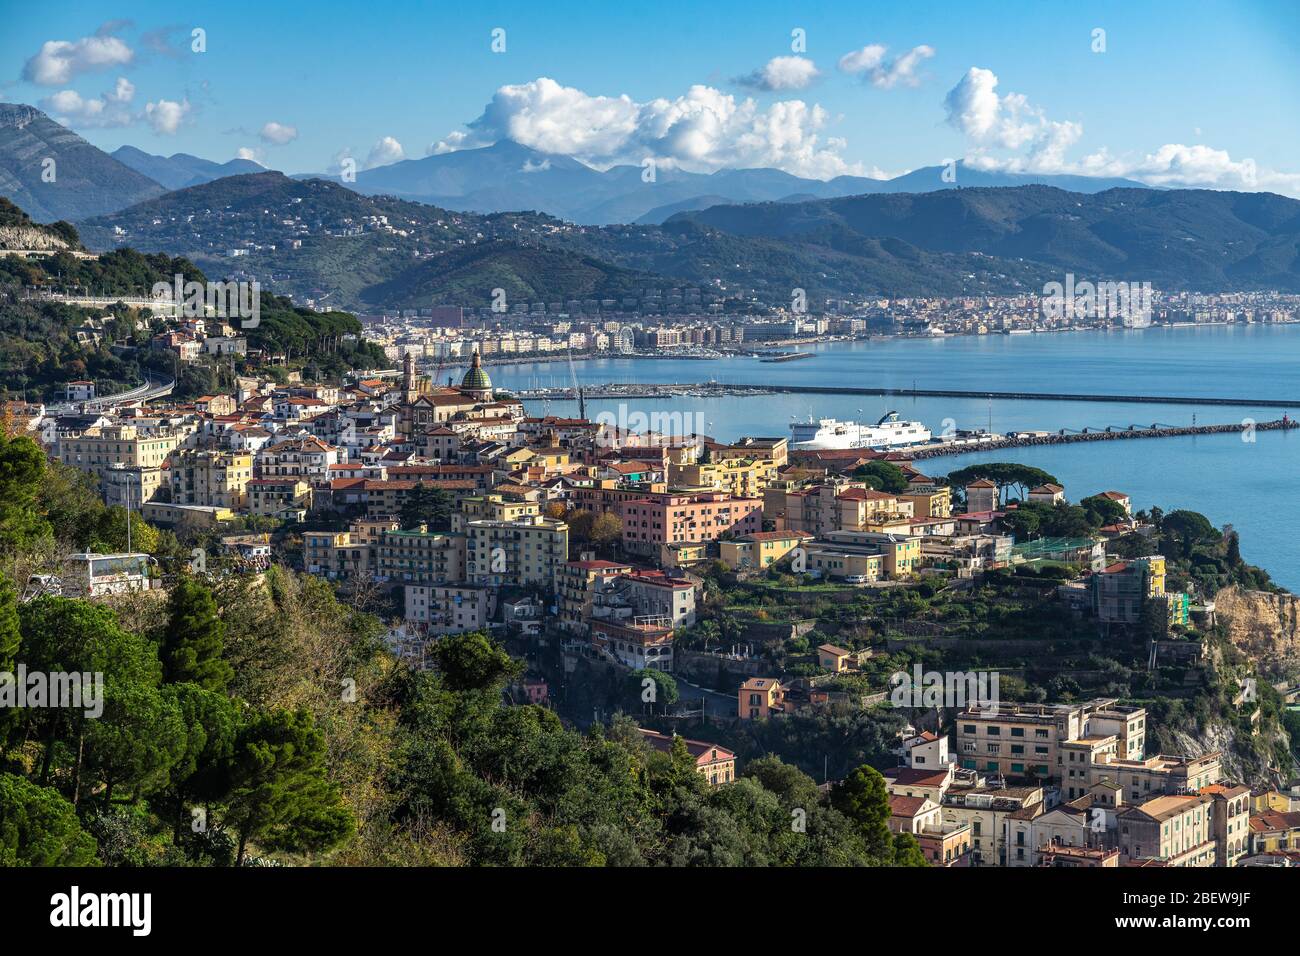 Panoramic view of the Gulf of Salerno with Vietri town in the foreground and Salerno port in the background, Campania, Italy Stock Photo